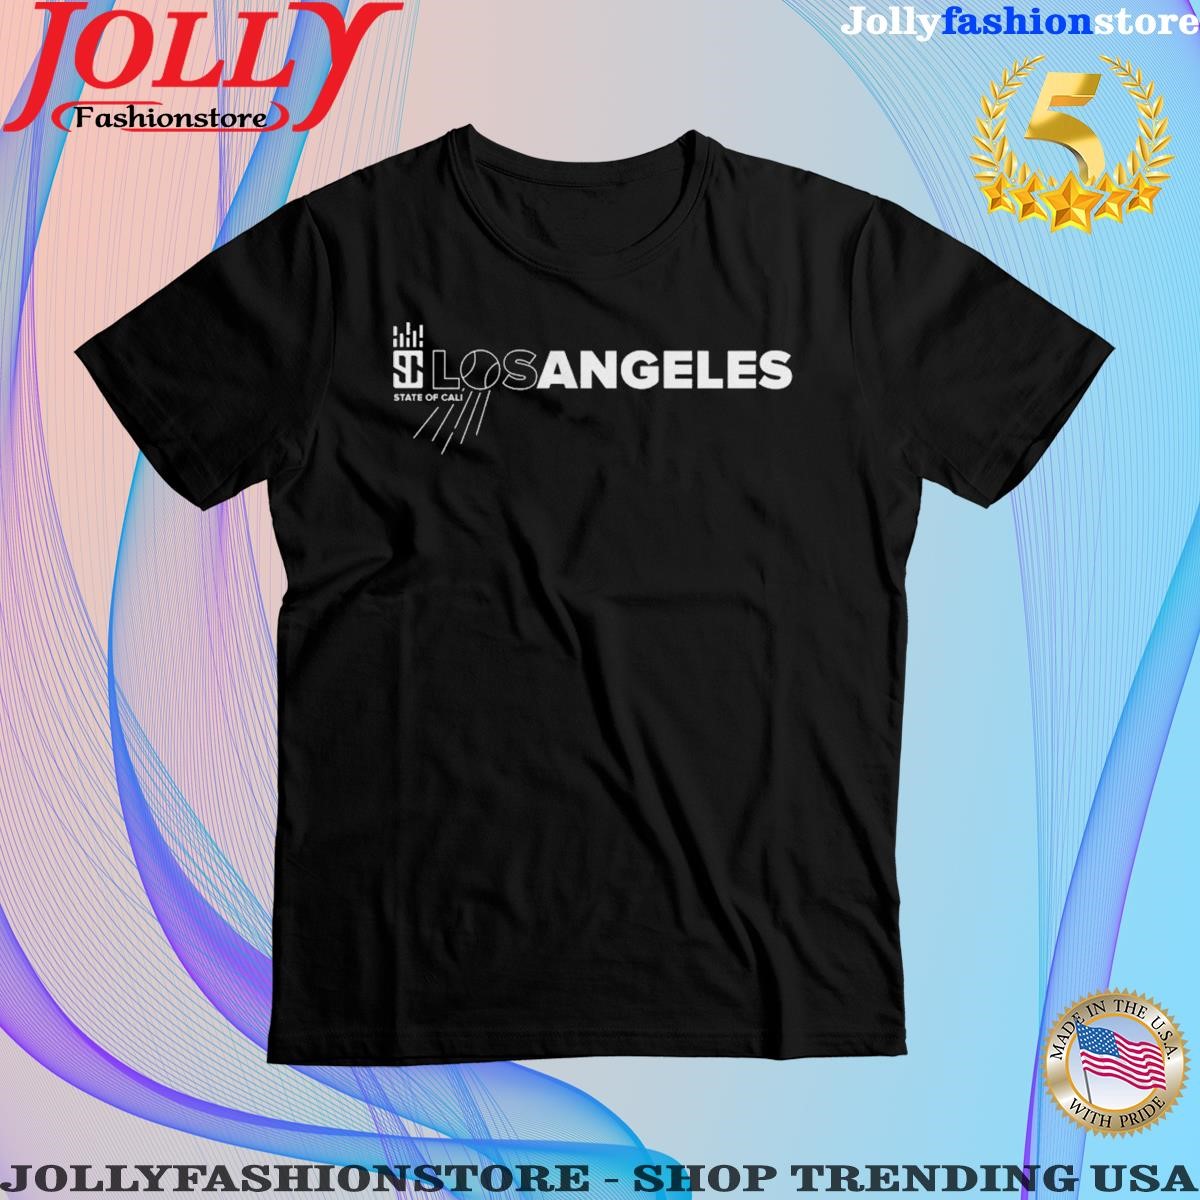 State of California los angeles Shirt